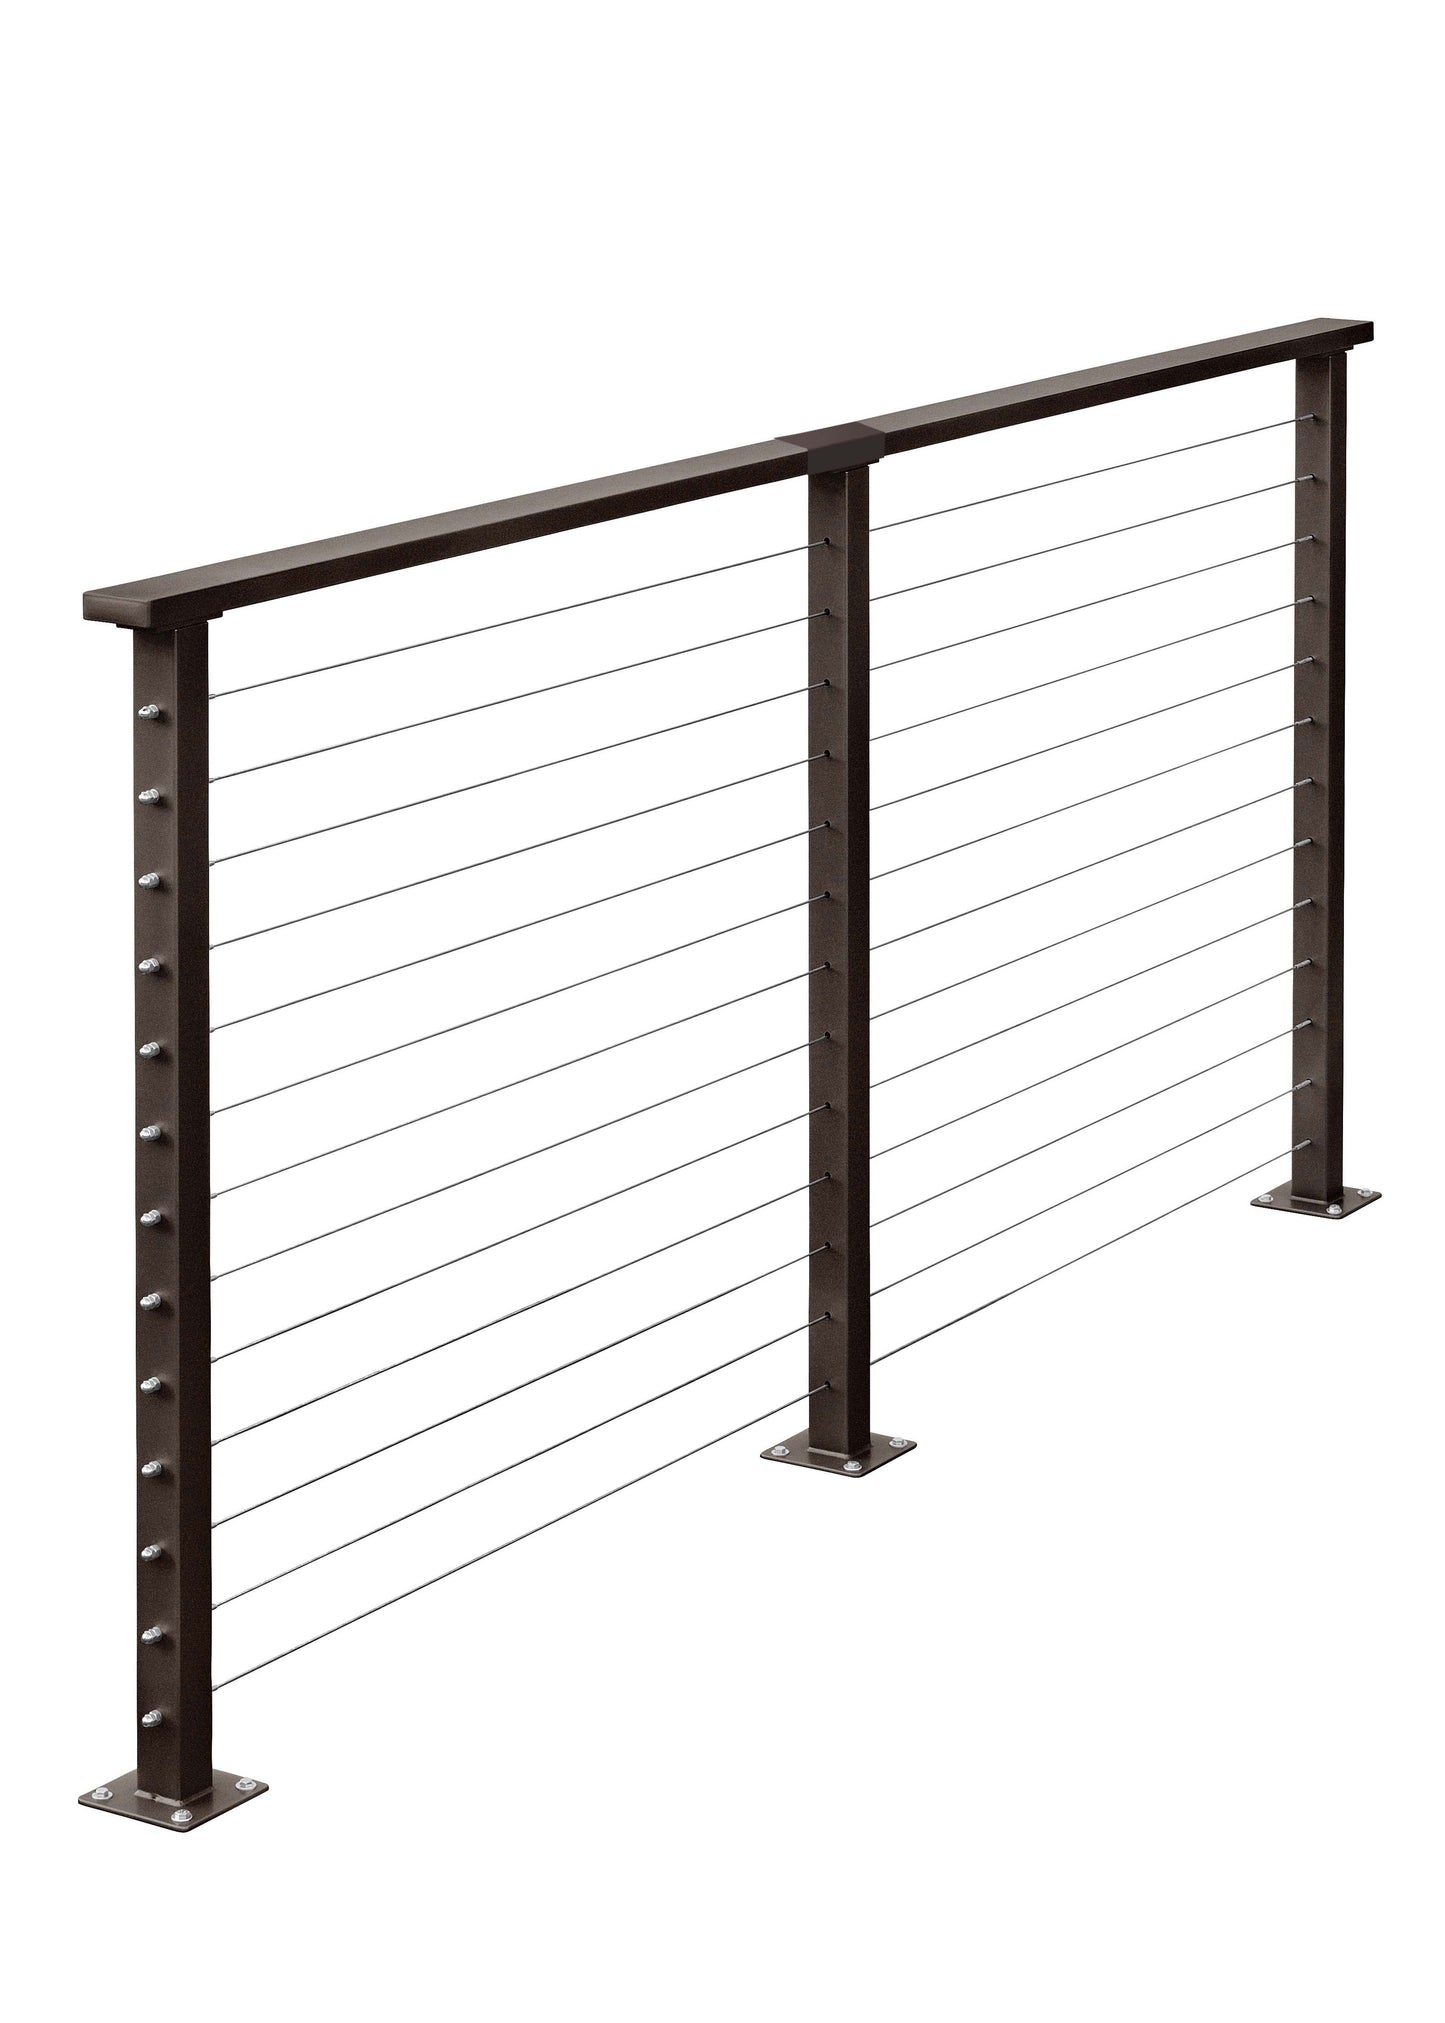 8 ft. Deck Cable Railing, 42 in. Base Mount, Bronze , Stainless